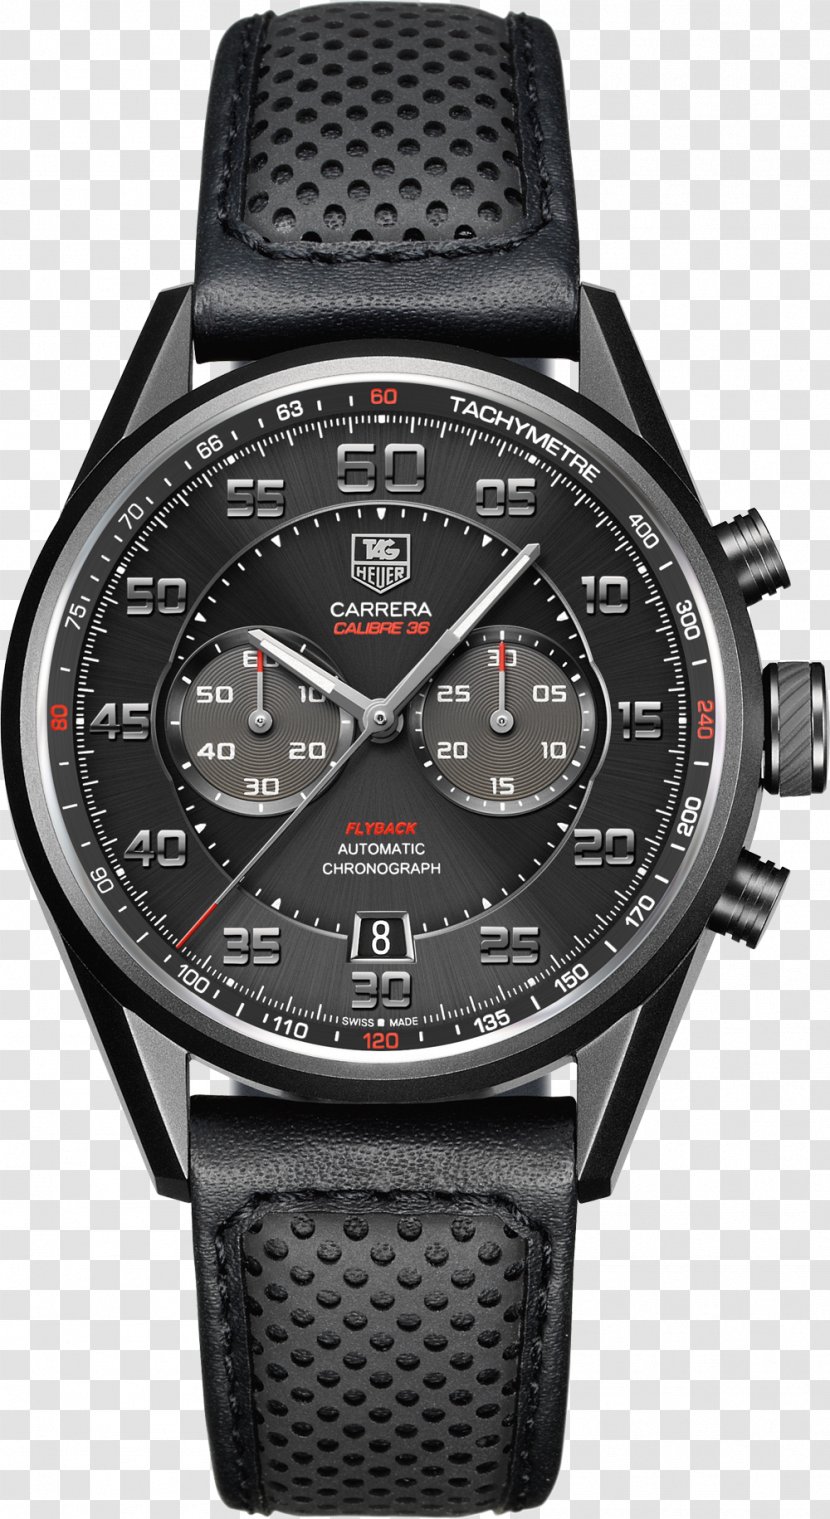 TAG Heuer Carrera Calibre 5 Watch 16 Day-Date Chronograph - Hardware Transparent PNG